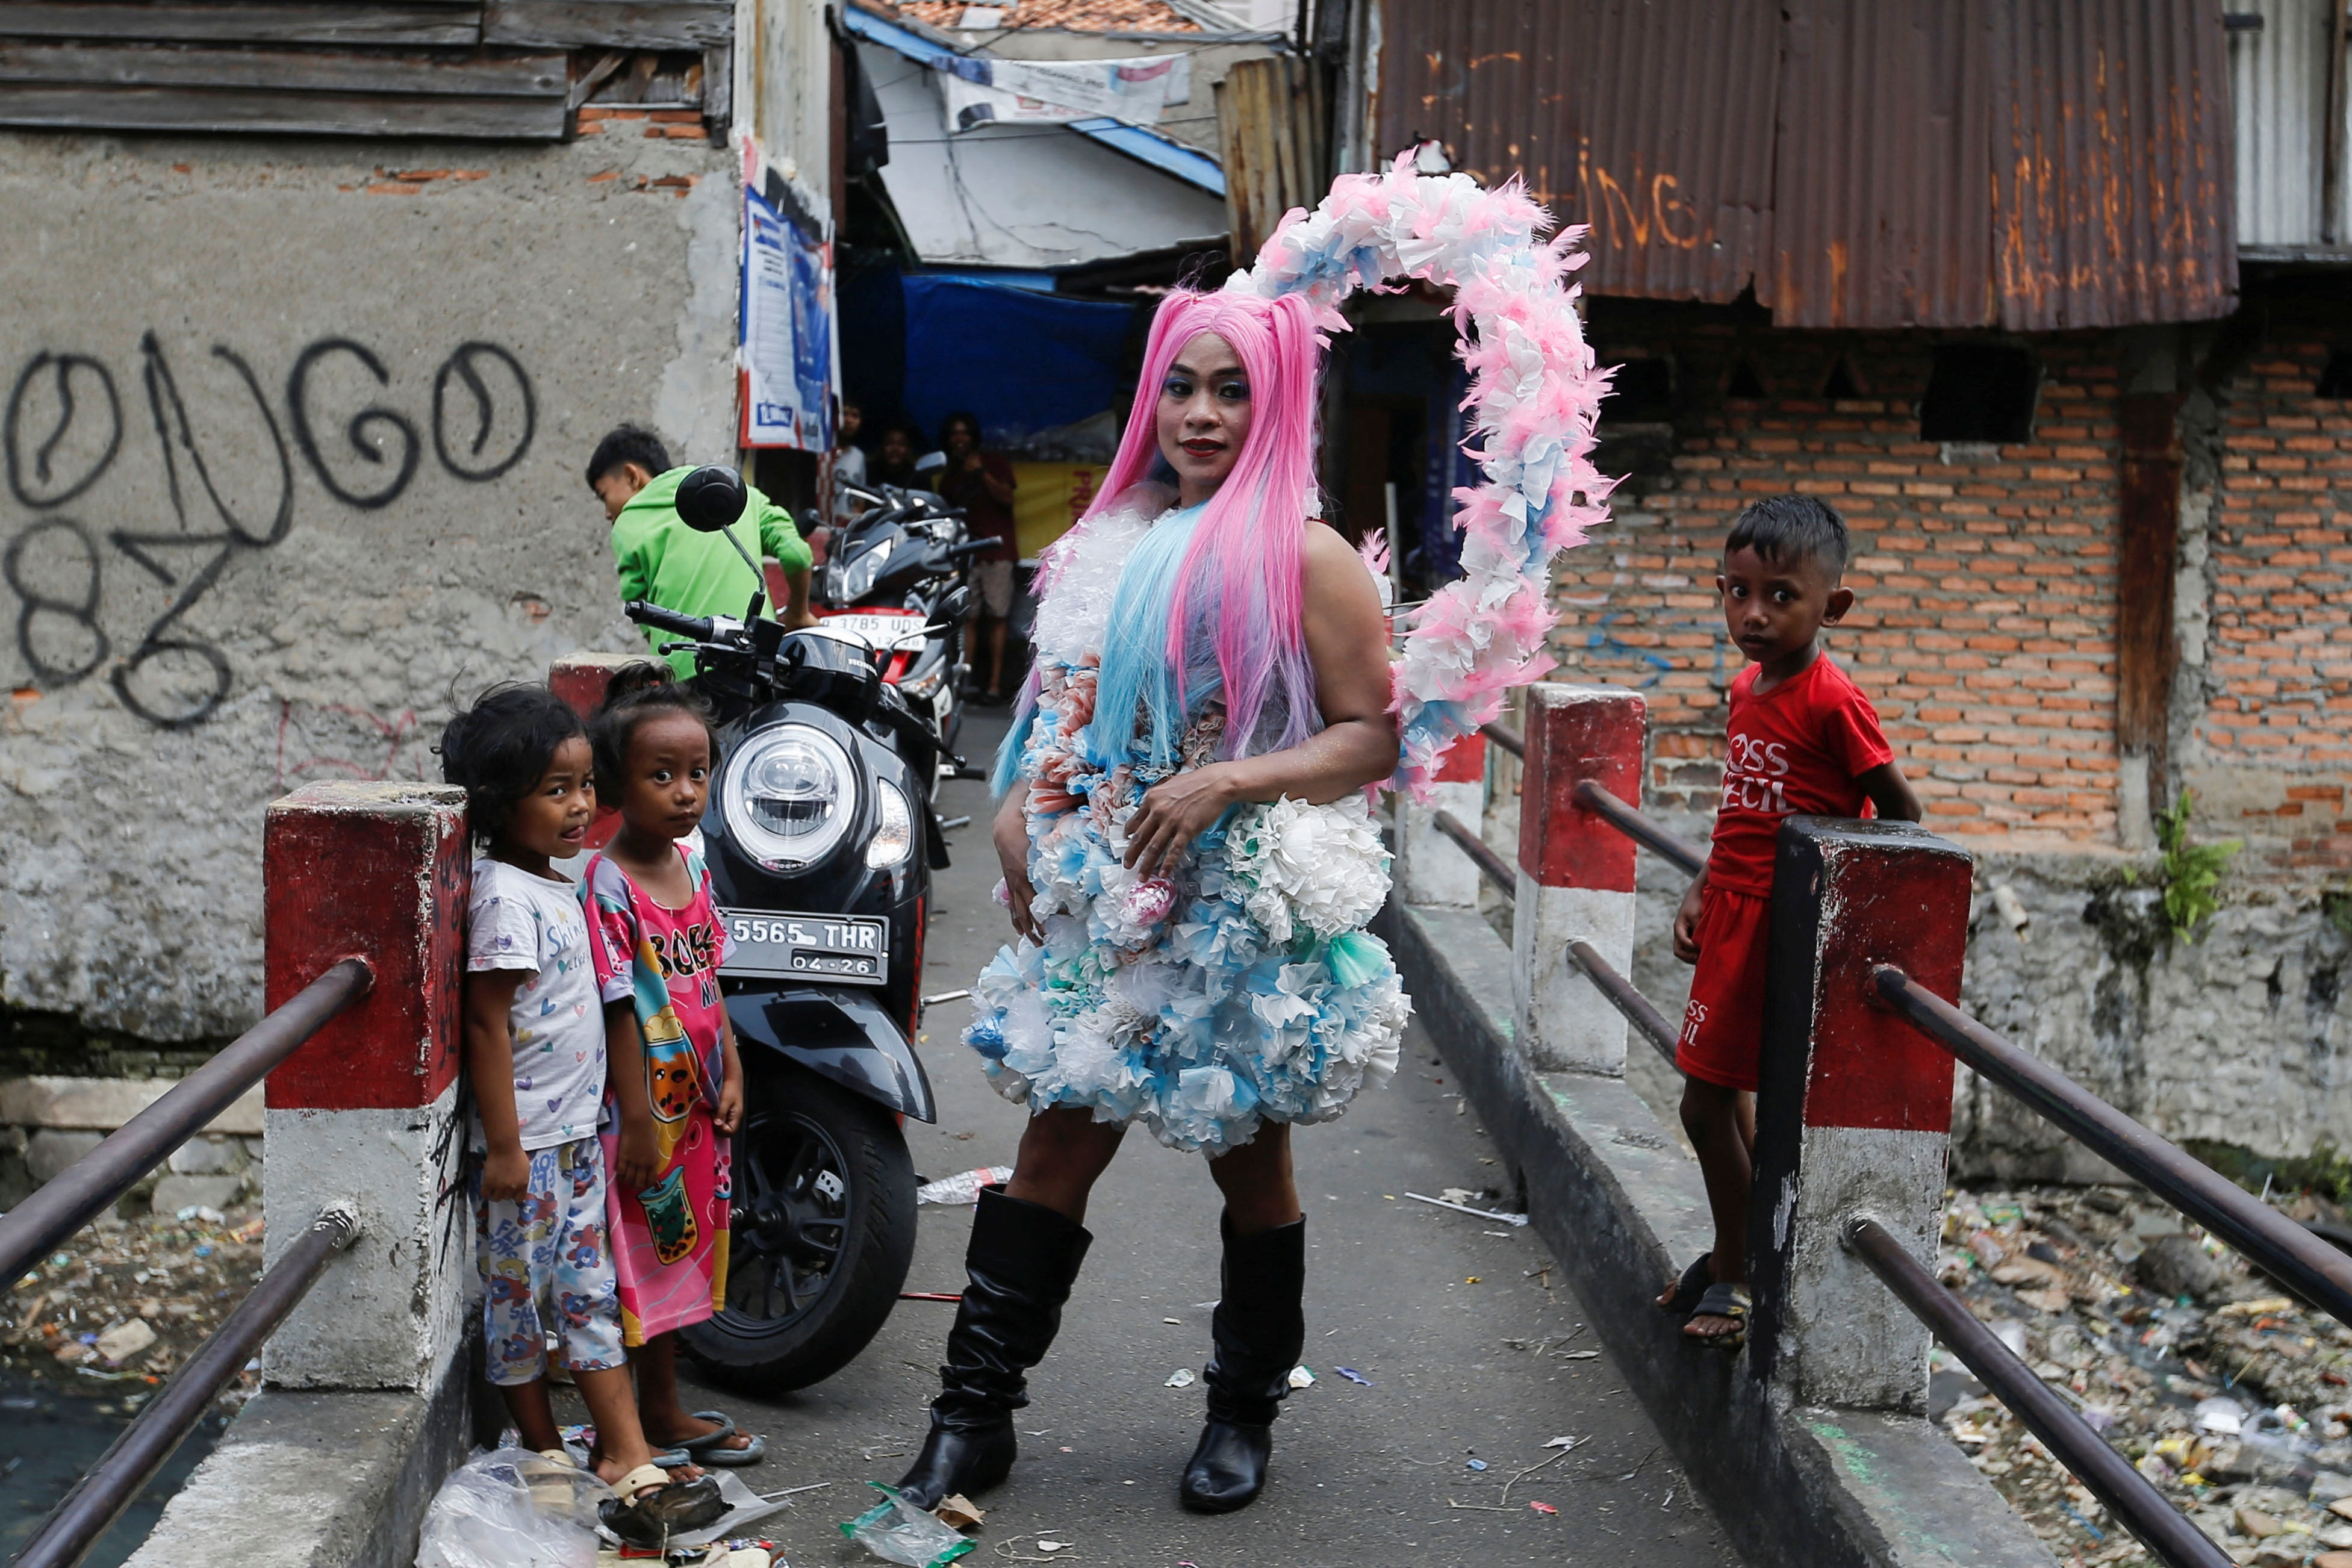 Trans Super Heroes fashion show at a traditional market in Jakarta